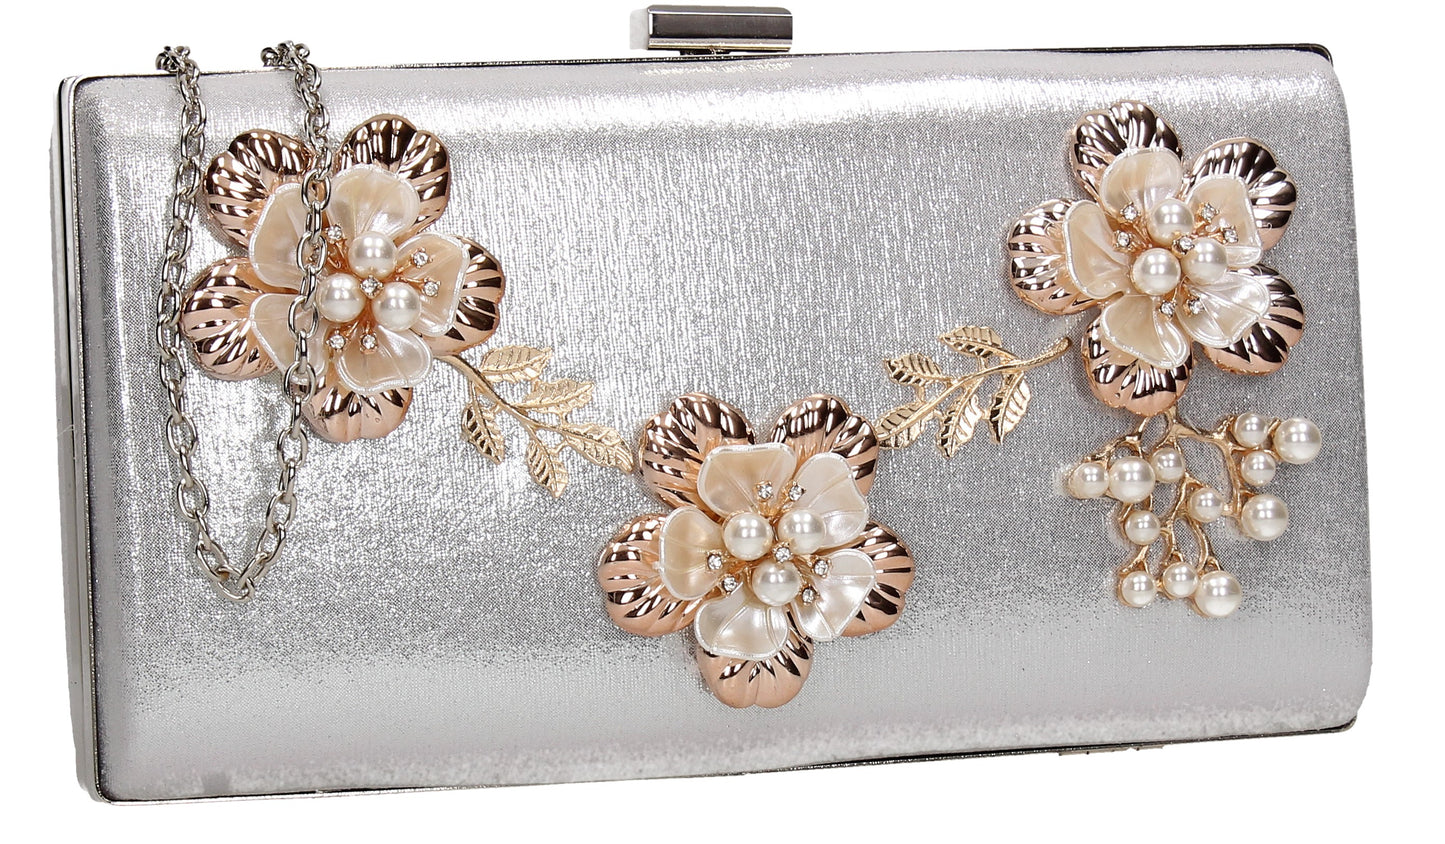 SWANKYSWANS Payton Floral Detail Clutch Bag Silver Cute Cheap Clutch Bag For Weddings School and Work